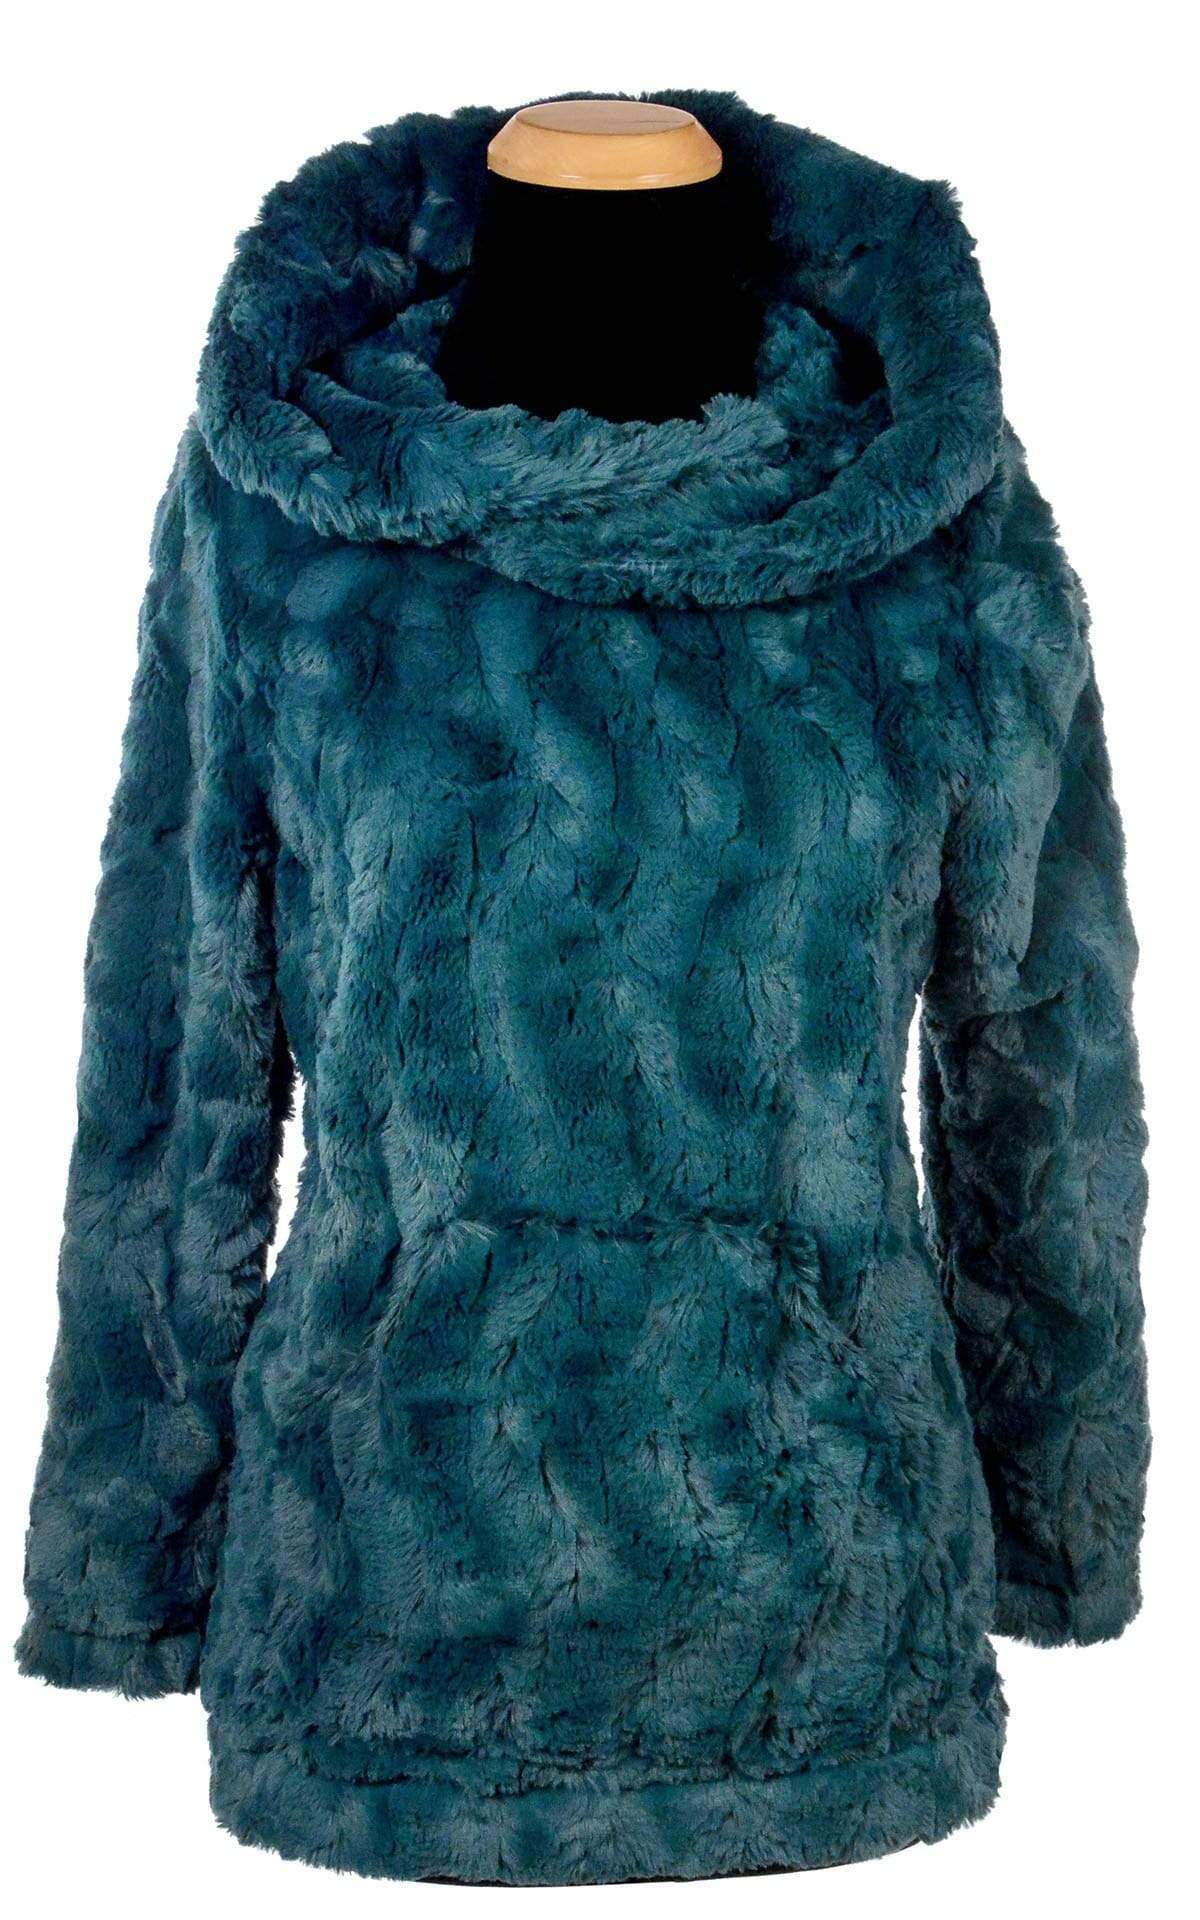 Hooded Lounger | Peacock Pond Faux Fur | Pandemonium Millinery USA